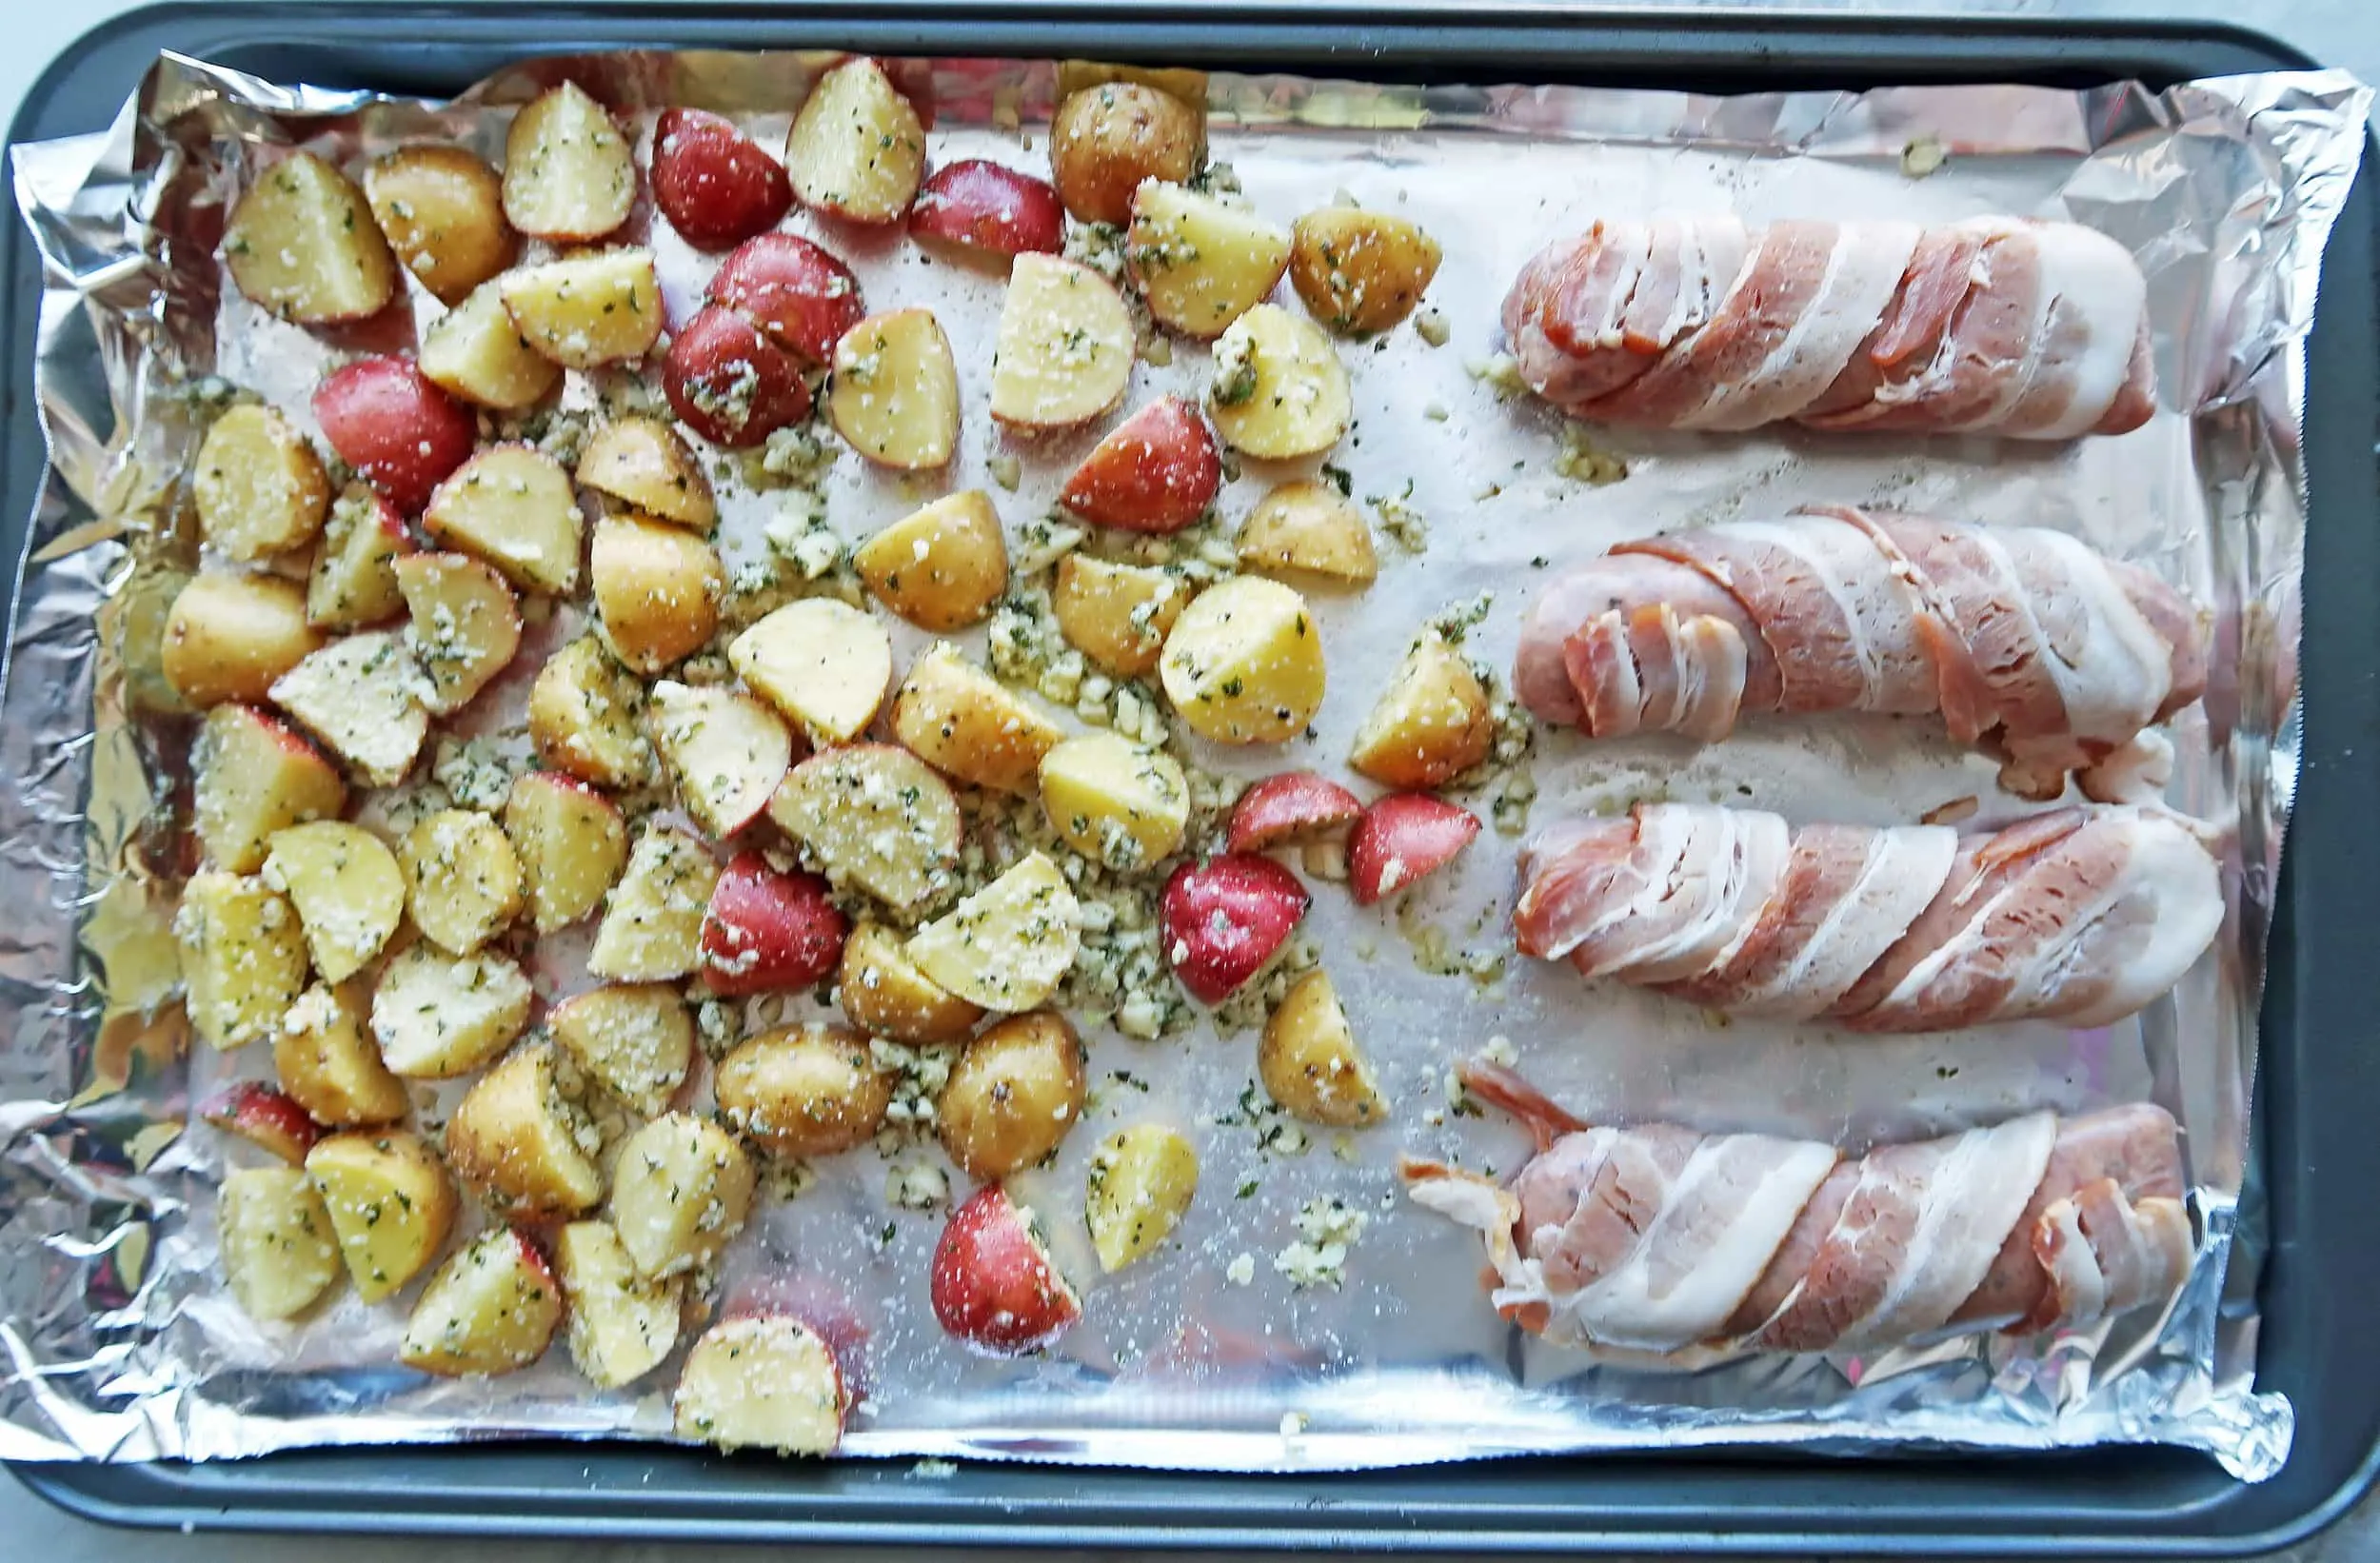 Potatoes and bacon-wrapped sausages on a baking sheet.